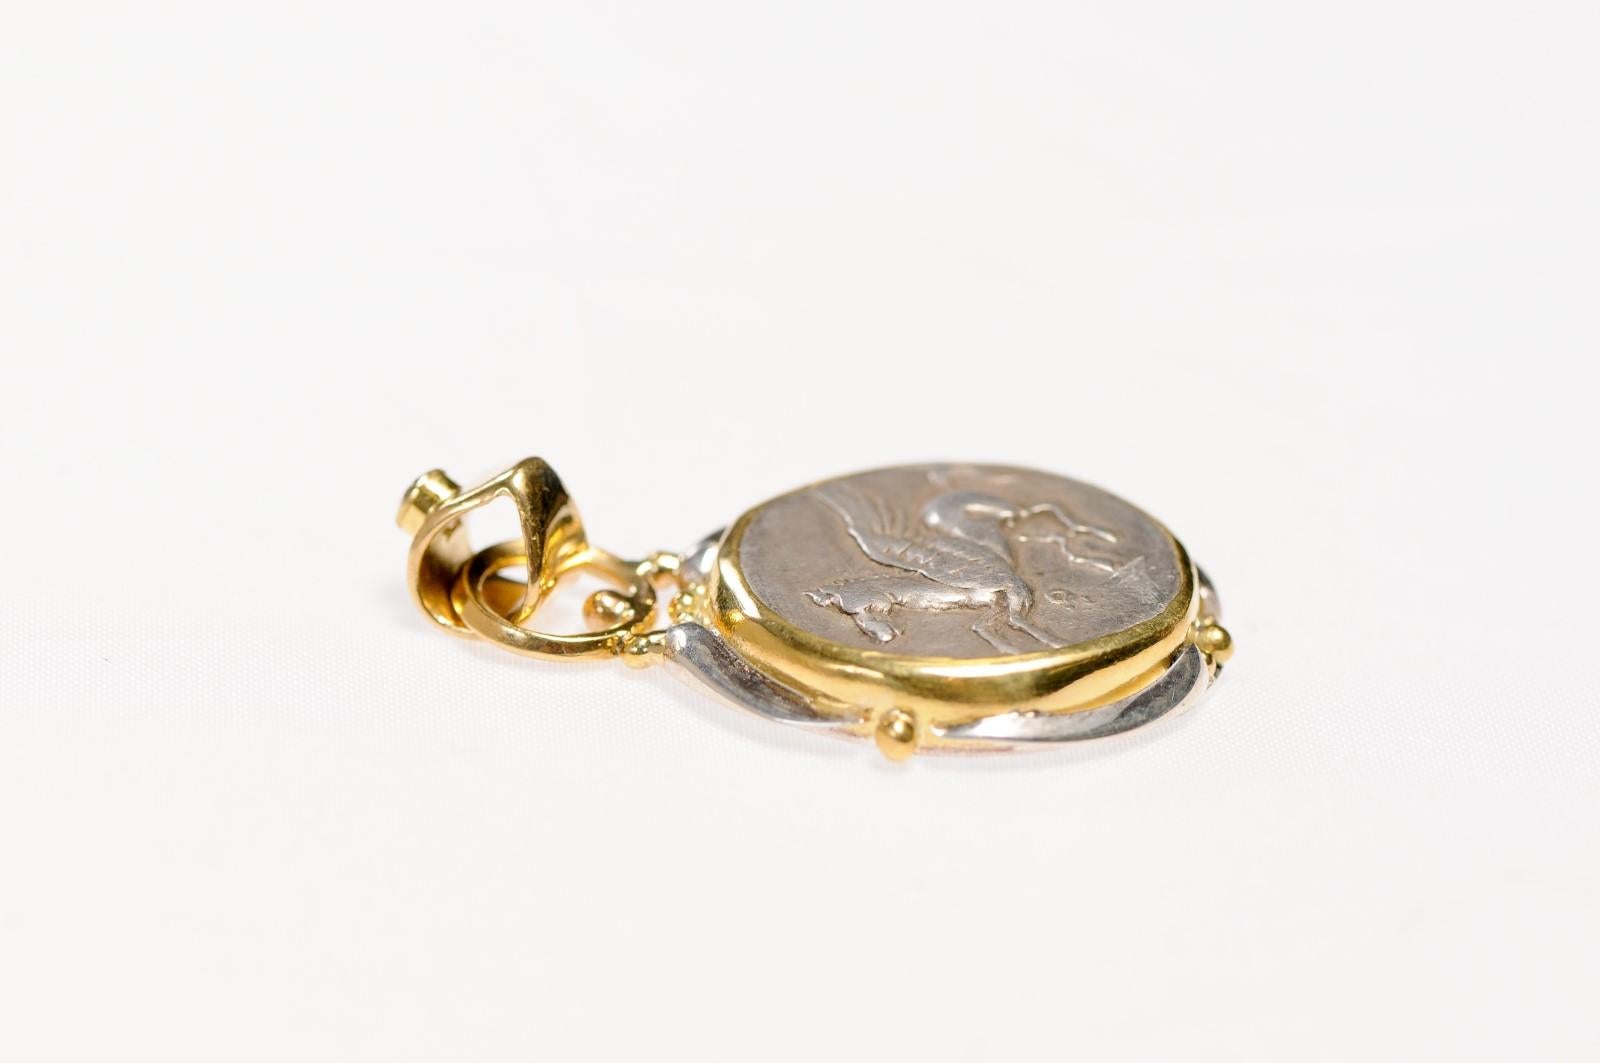 Ancient Pegasus Coin in 22 kt Gold Pendant (pendant only) For Sale 6